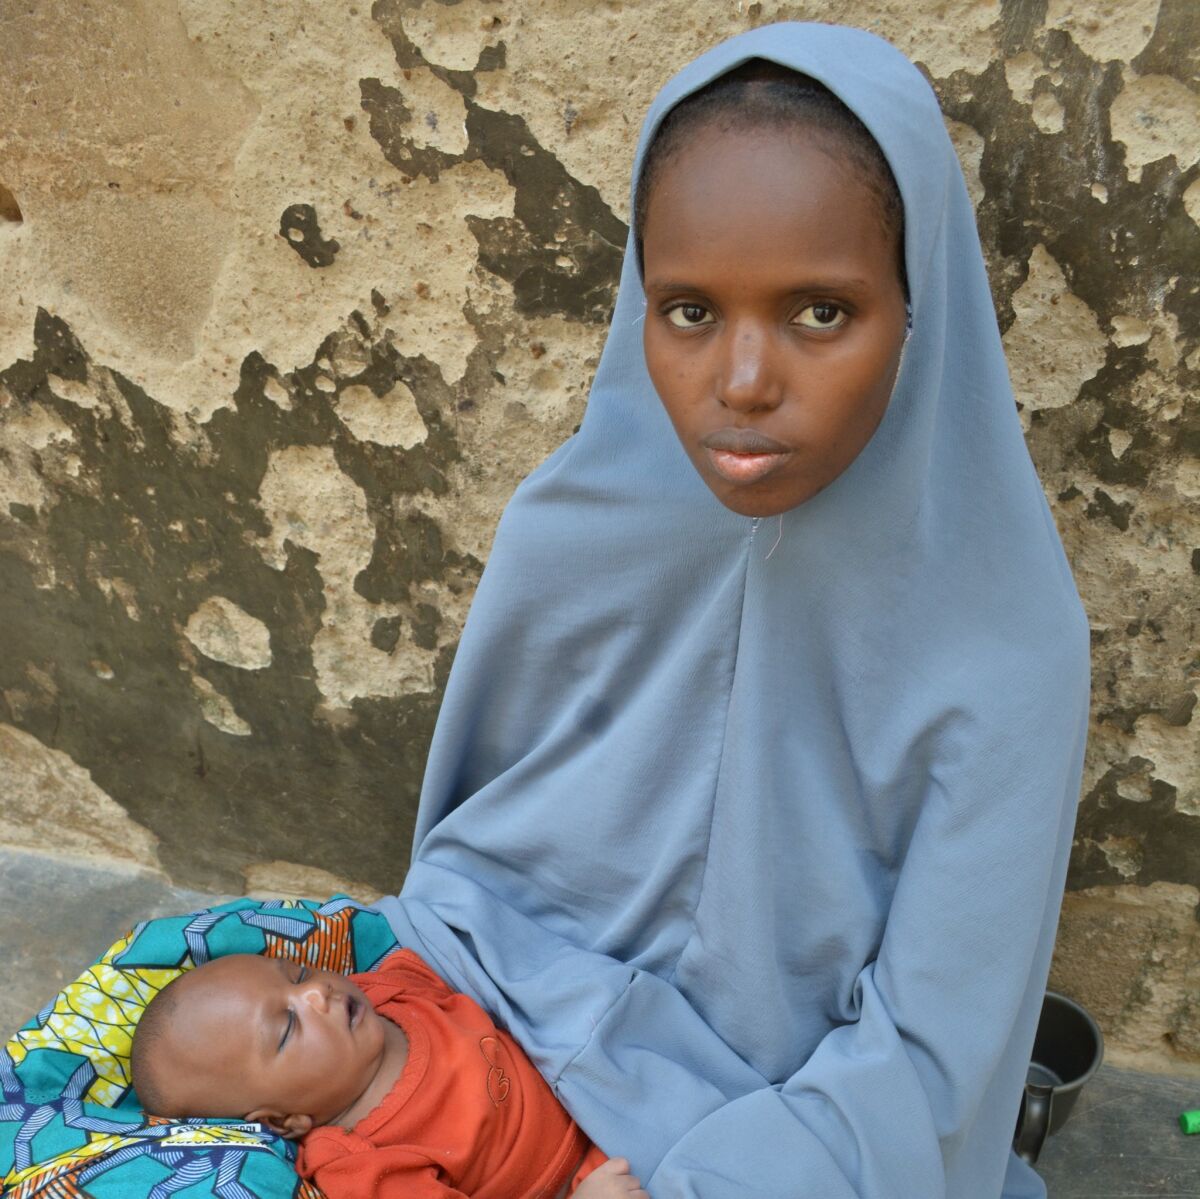 Maryam Adam, 25, once dreamed of becoming a nurse. Married off at 15 to an impoverished bricklayer, she lost a 2-month-old baby daughter in 2015 for lack of a few coins to get the girl to a hospital.